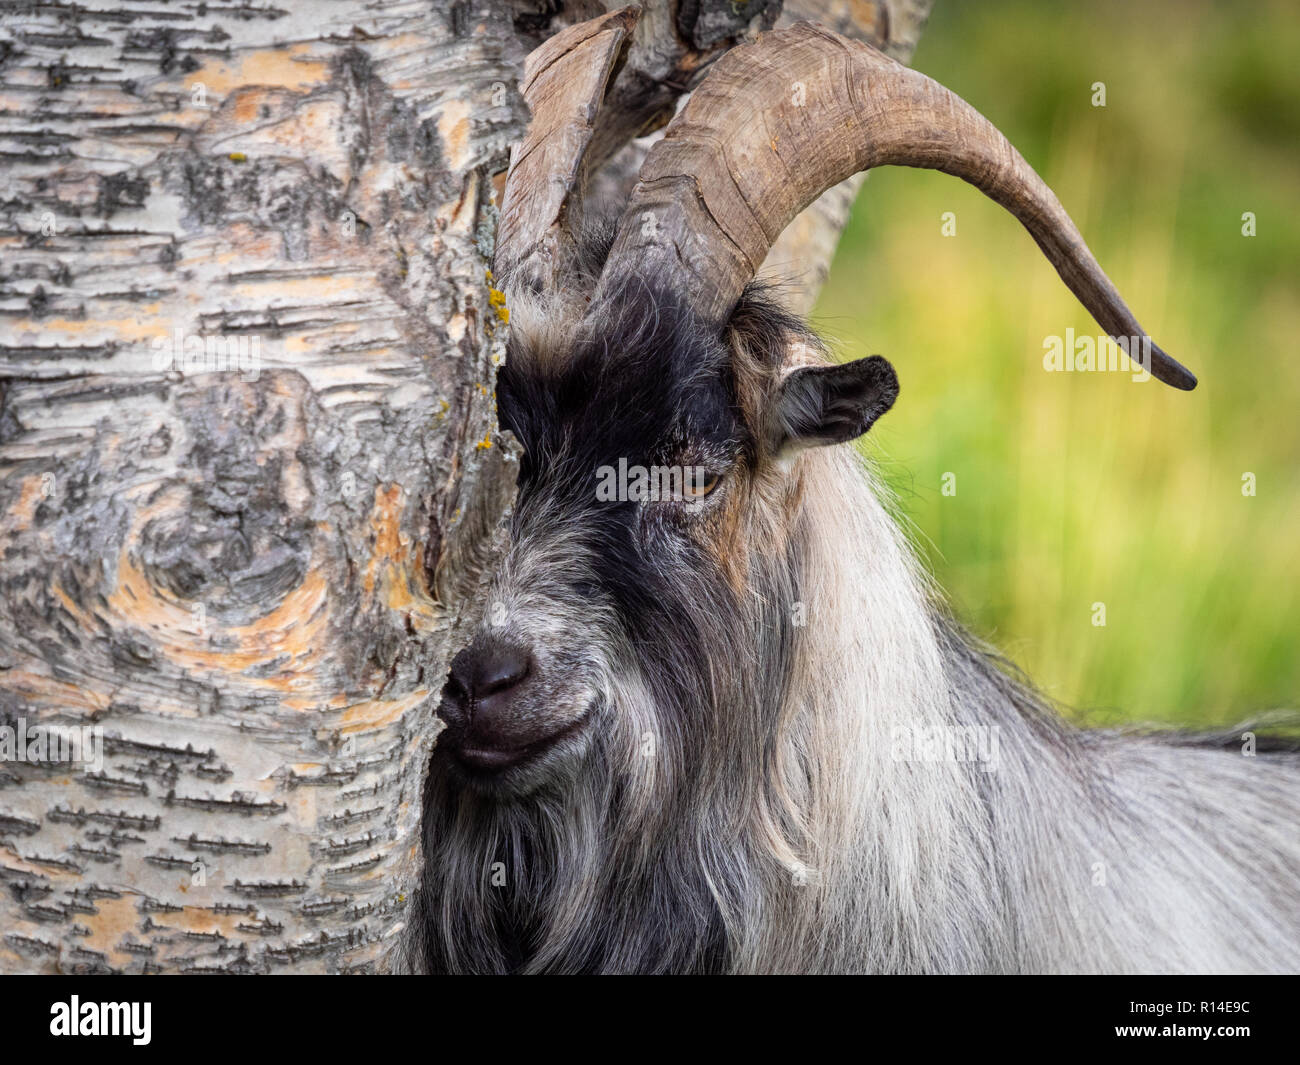 A male goat hiding behind a tree while looking at the photographer. Stock Photo